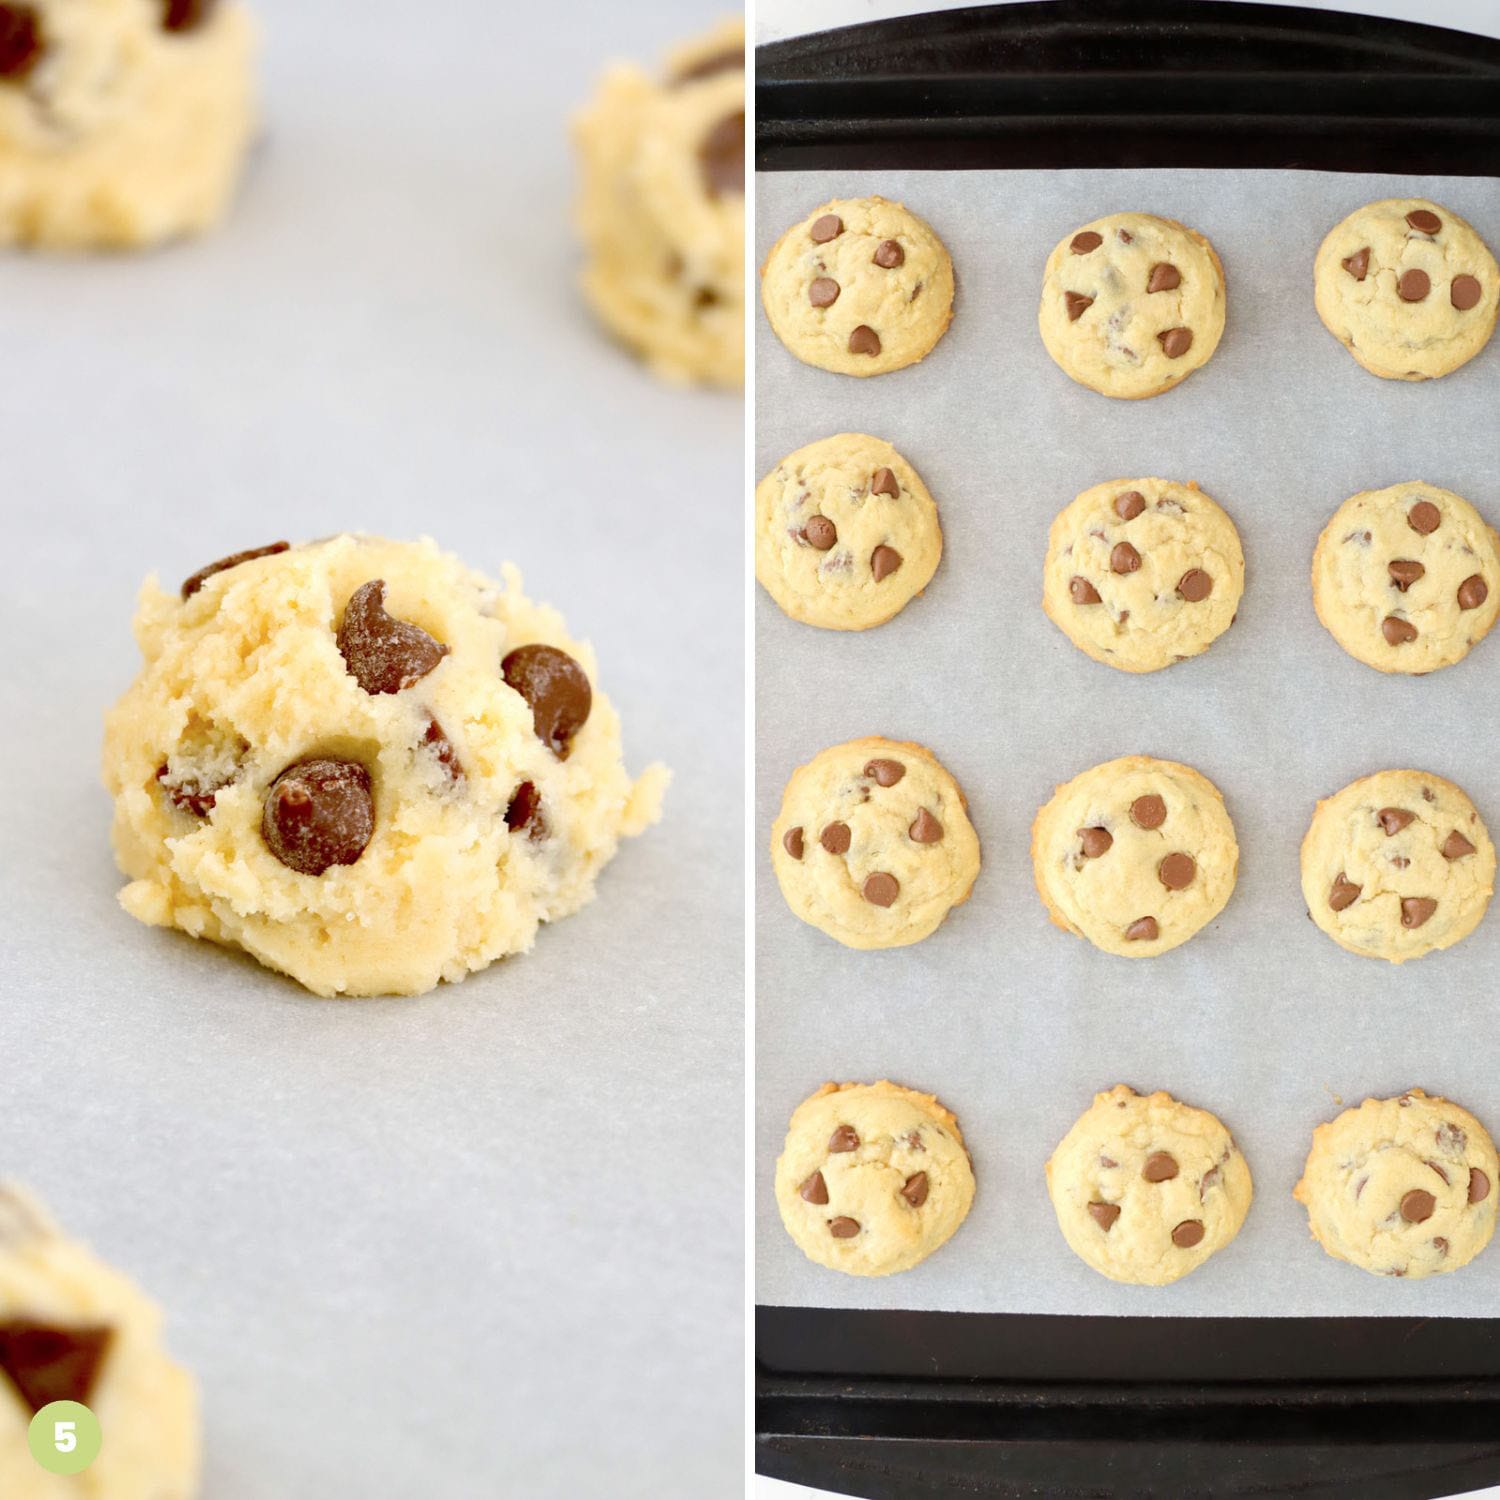 two images showing how to drop and bake chocolate chip cookies with no brown sugar in them.